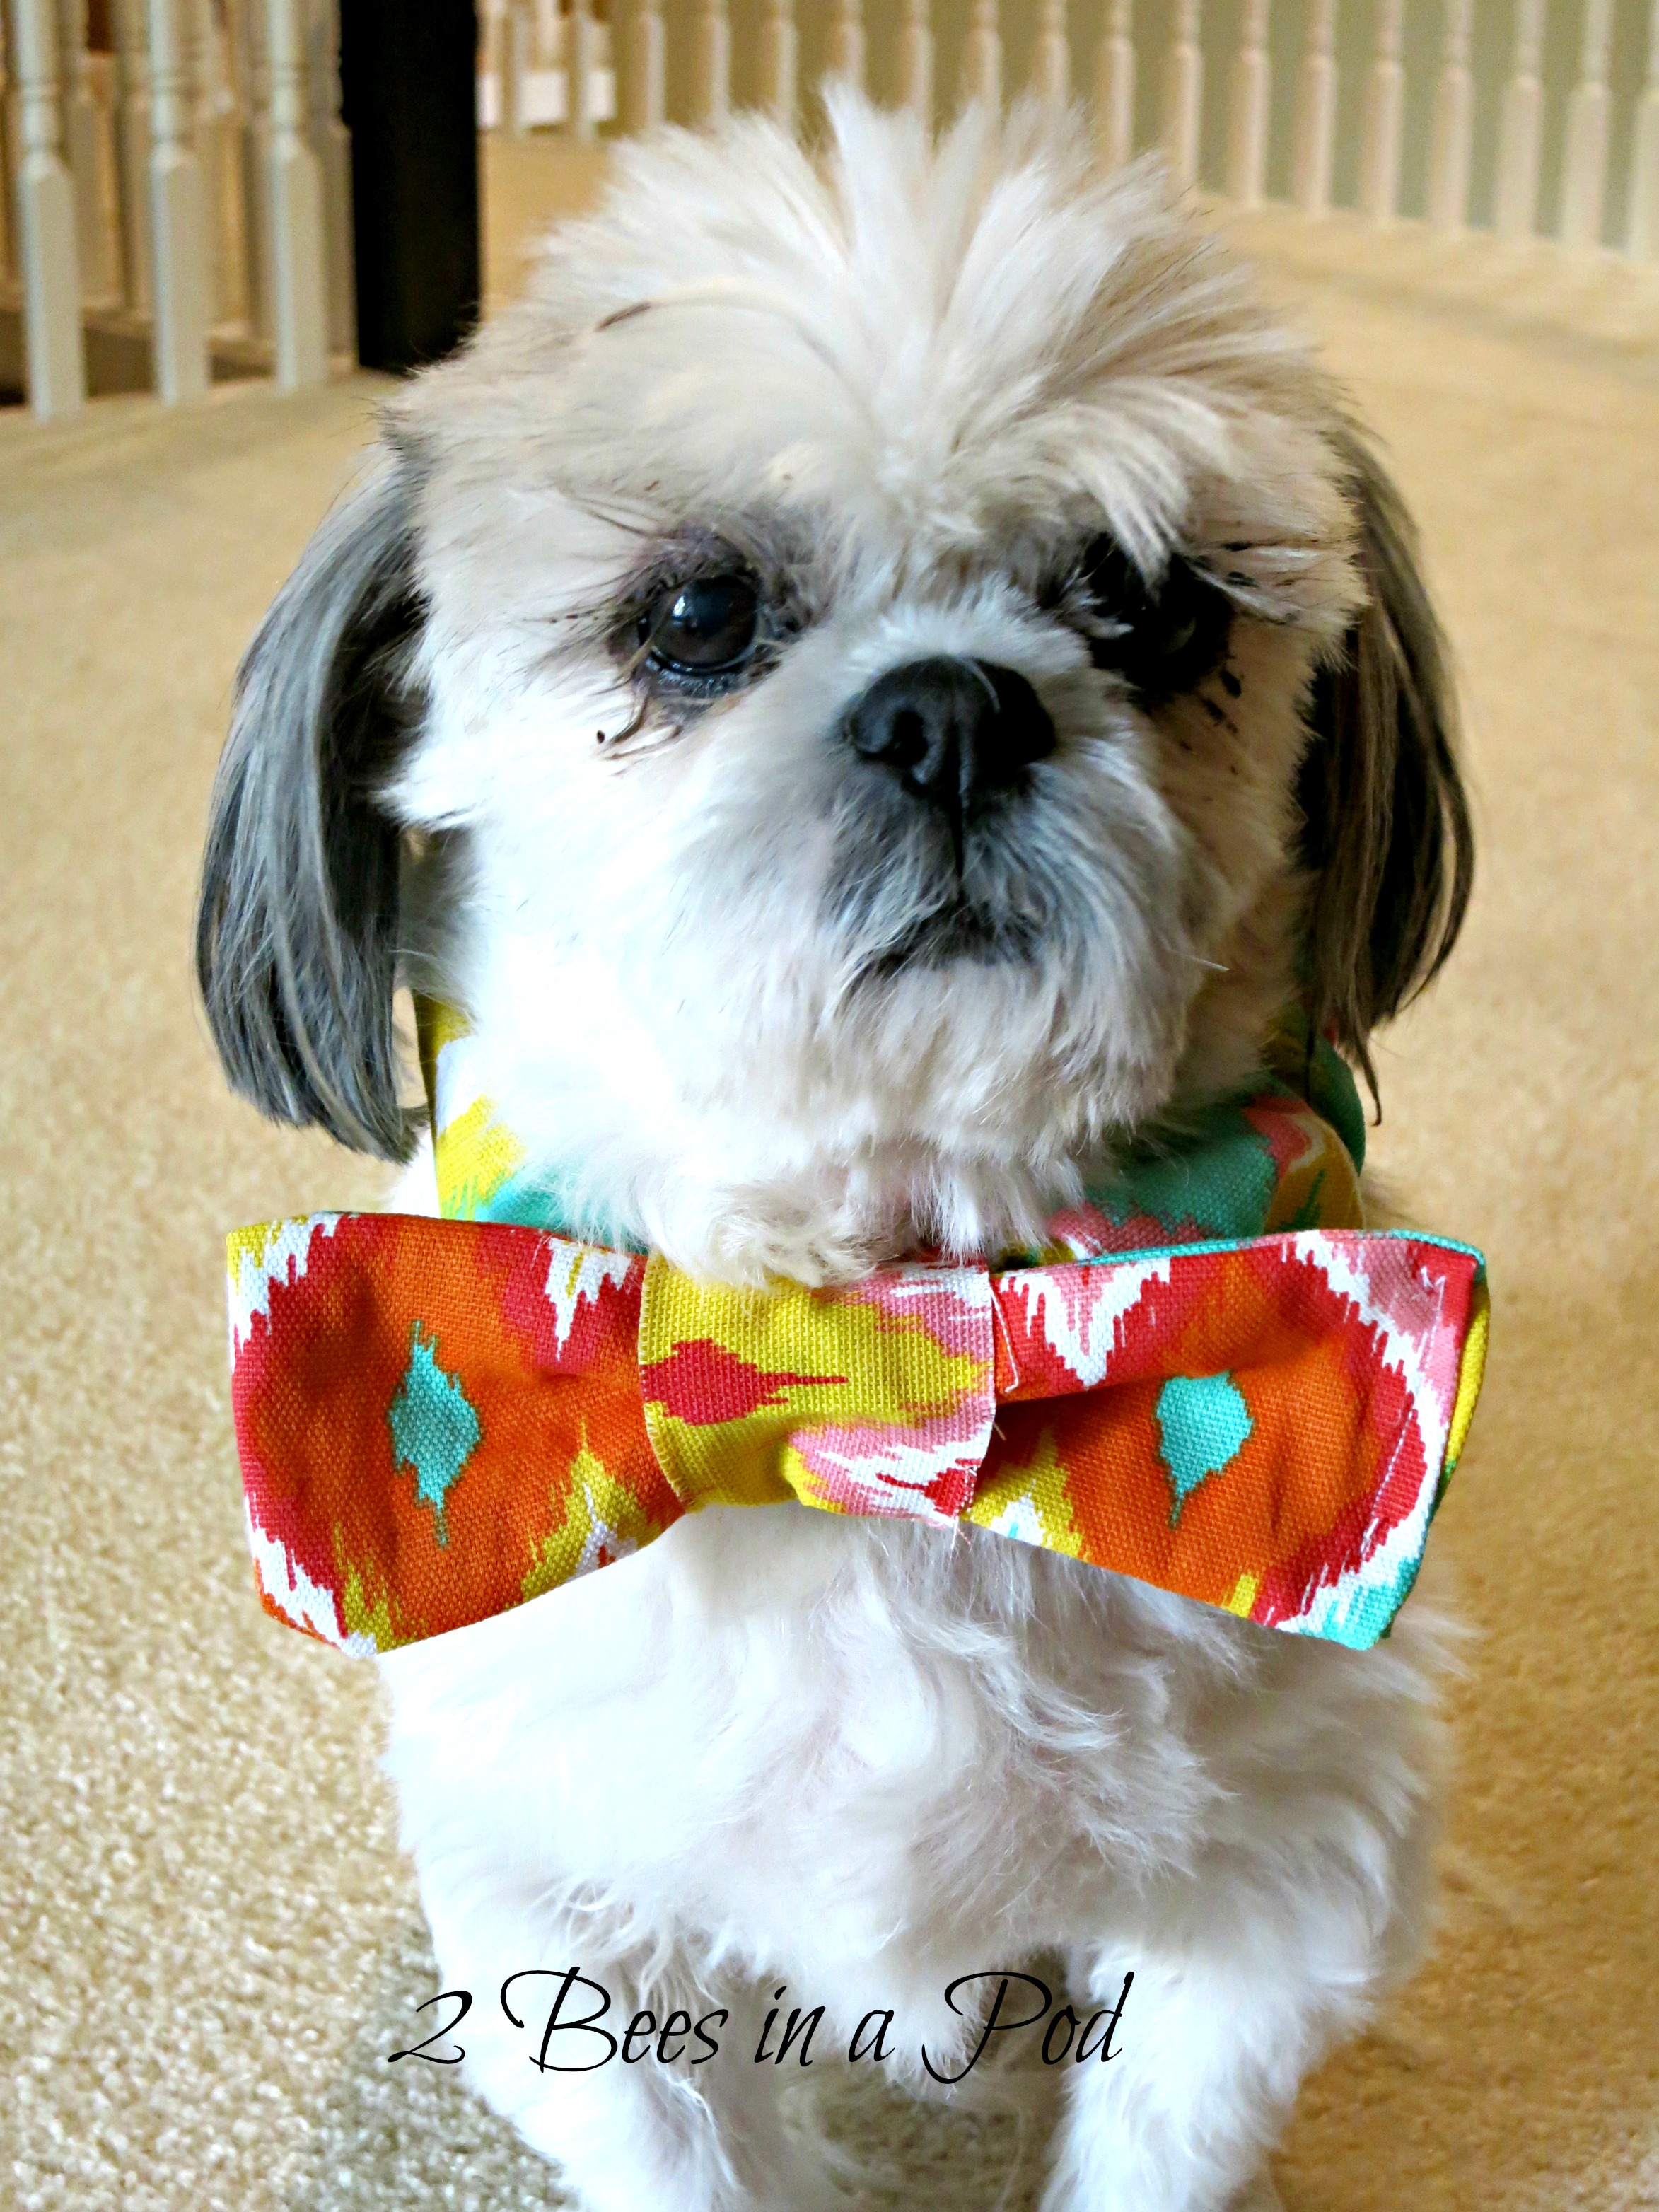 Festive DIY Bow Tie for our family dog. Bridal Shower ready - our Shih tzu loves to dress up and didn't want to be left out!